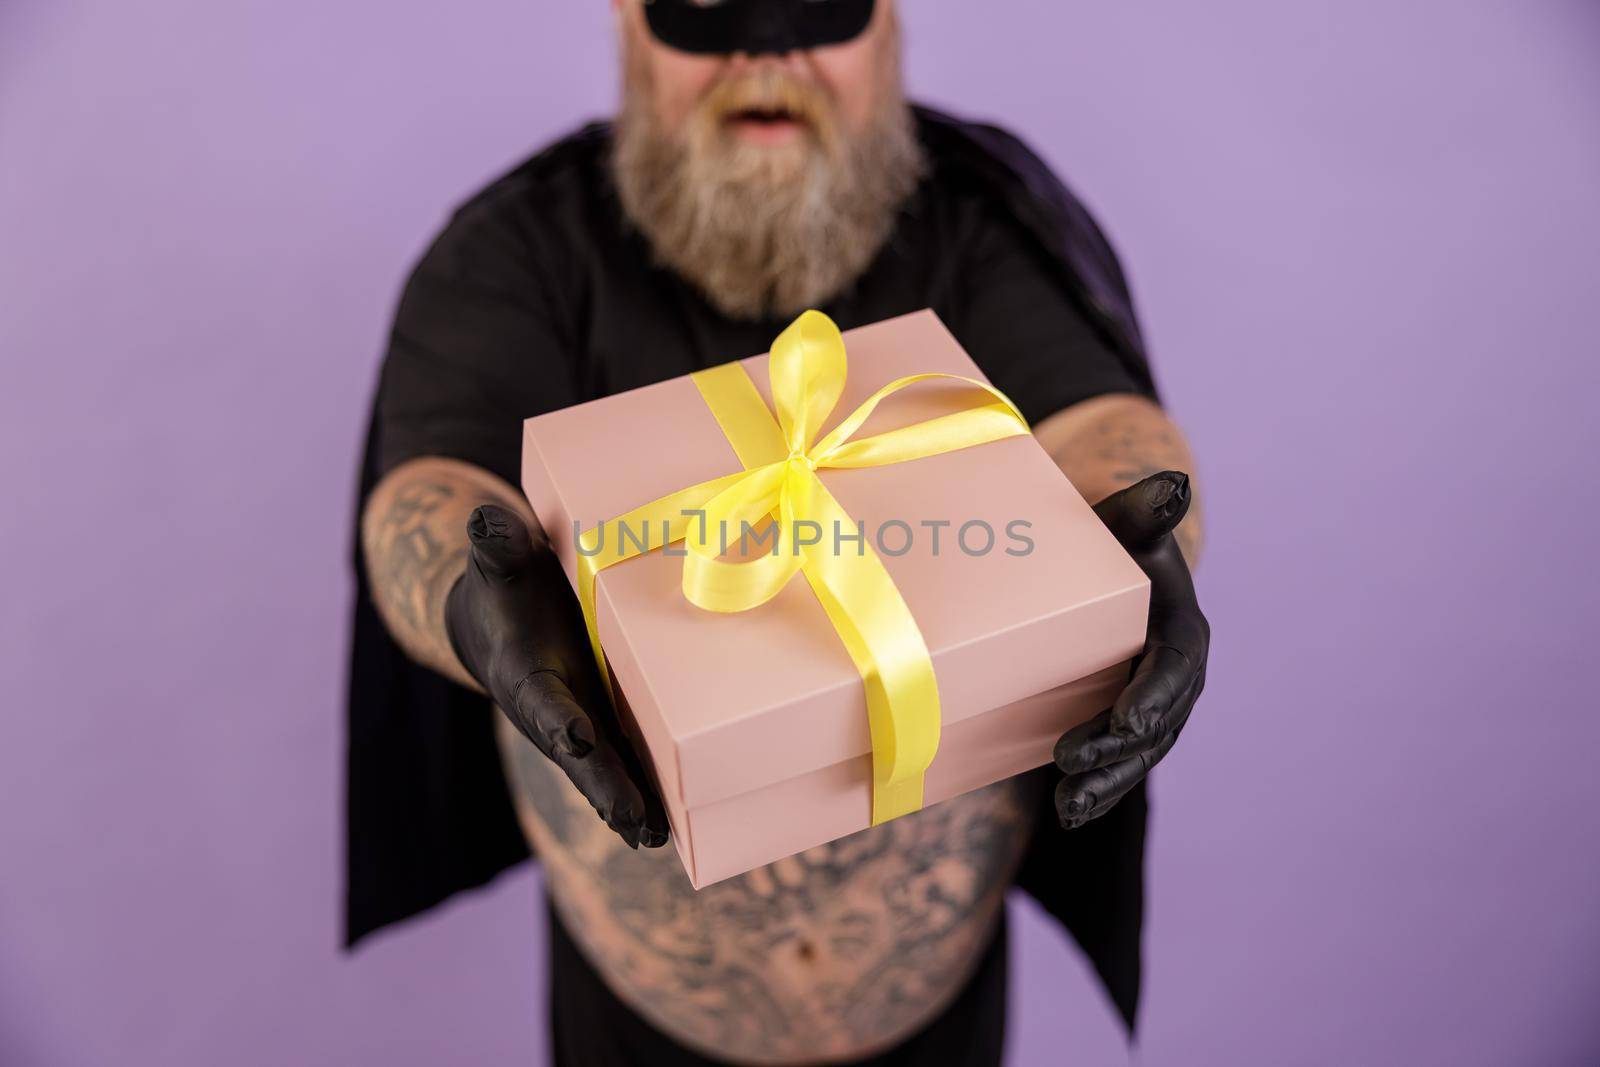 Middle aged bearded man with overweight wearing carnval hero costume with cape on purple background in studio closeup, focus on hands with gift box